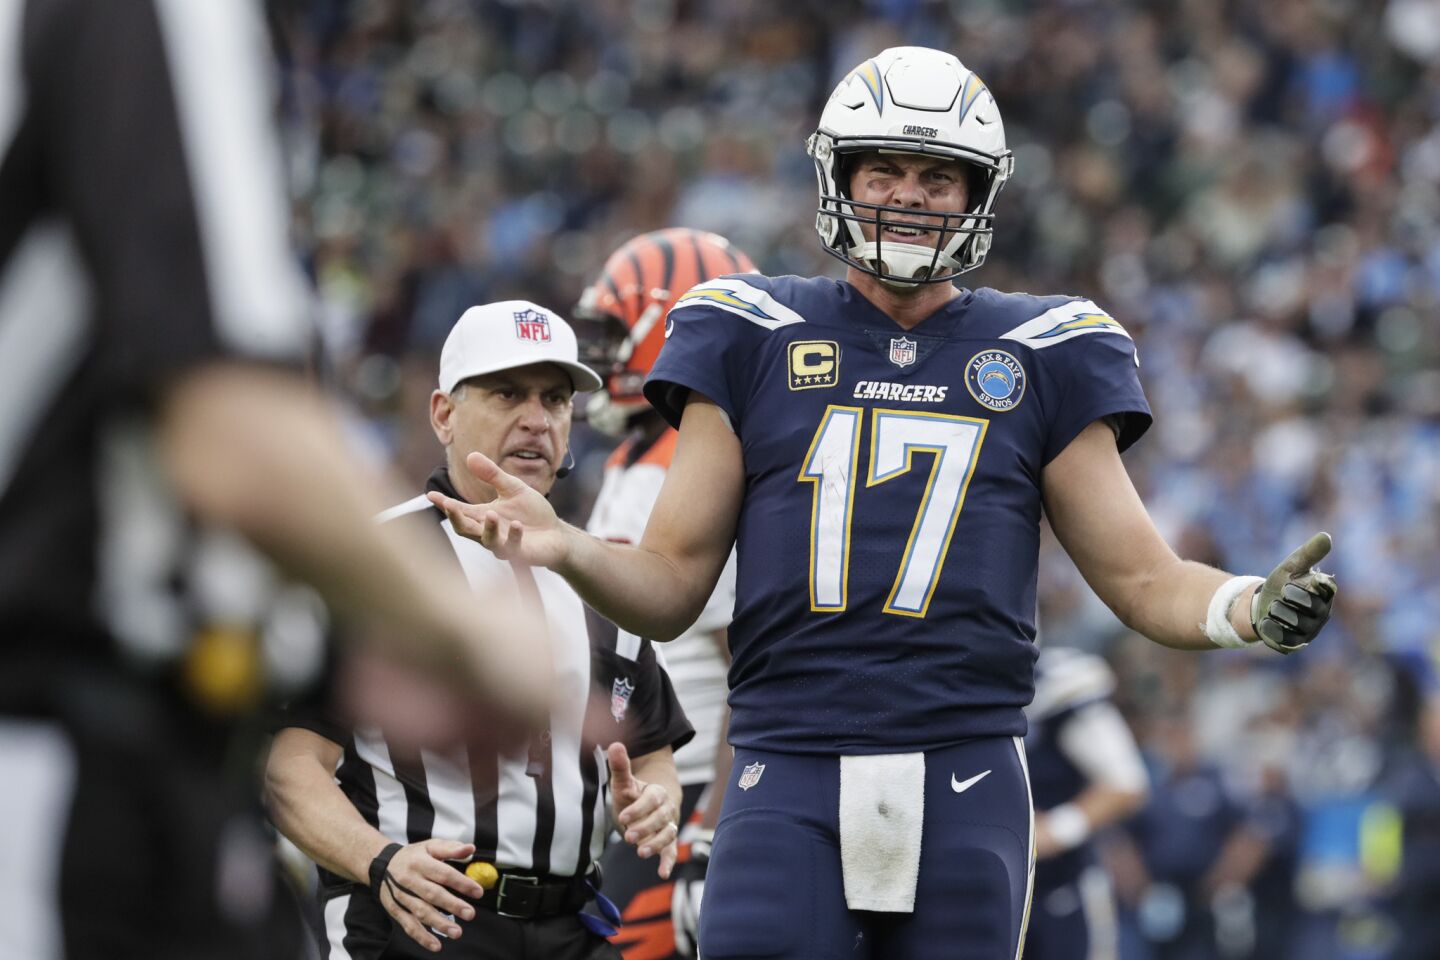 Chargers quarteback Philip Rivers complains to an official after failing to connect with Keenan Allen, arguing that pass interference should’ve been called late in the fourth quarter.